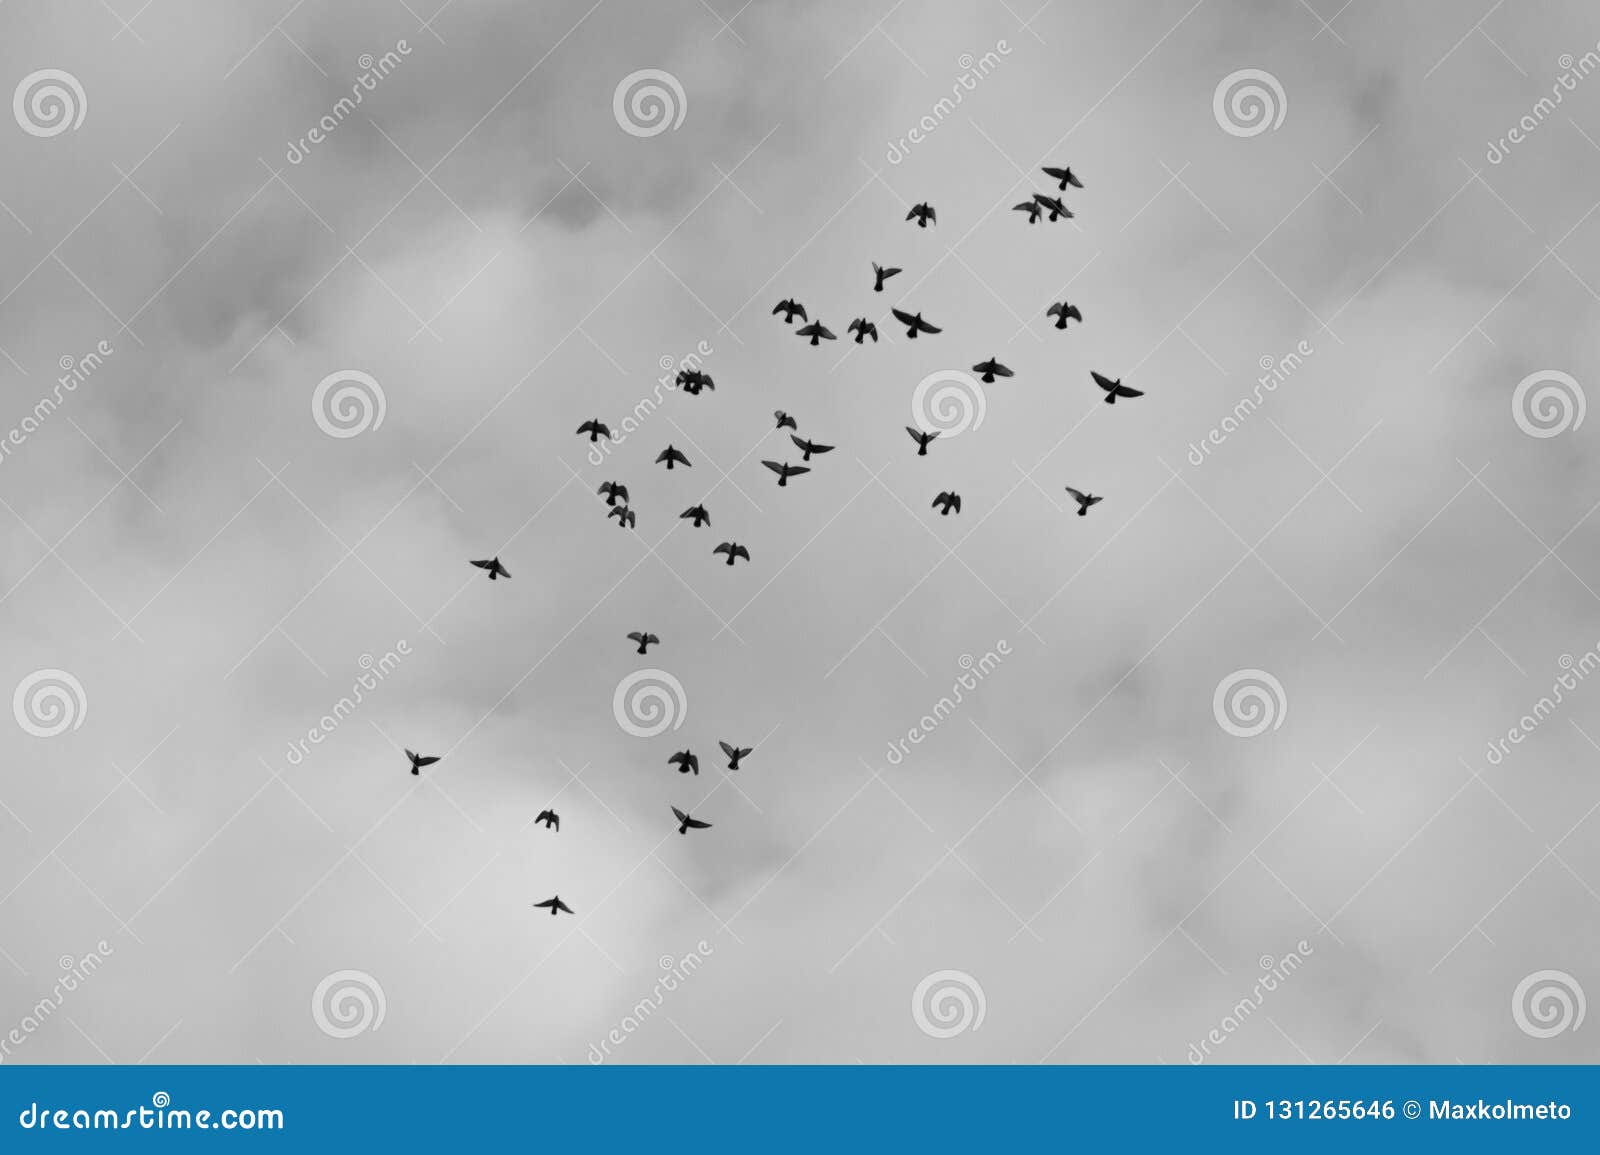 flying migrate birds black and white background